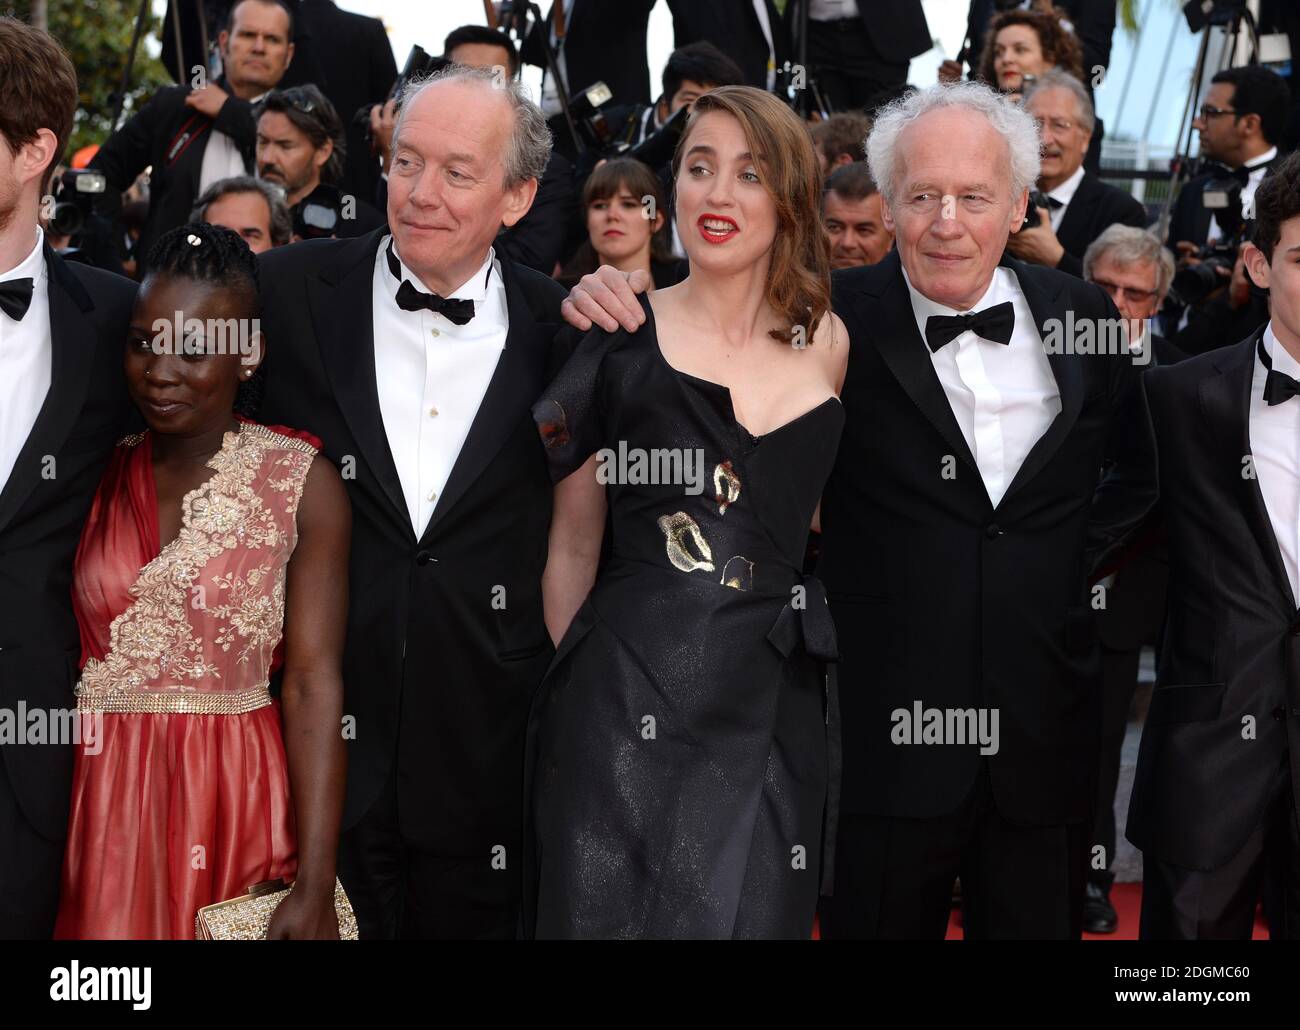 Nadege Ouedraogo, Luc Dardenne, Adele Haenel and Jean-Pierre Dardenne  attending The Unknown Girl premiere, held at the Palais De Festival. Part  of the 69th Cannes Film Festival in France. (Mandatory credit: Doug